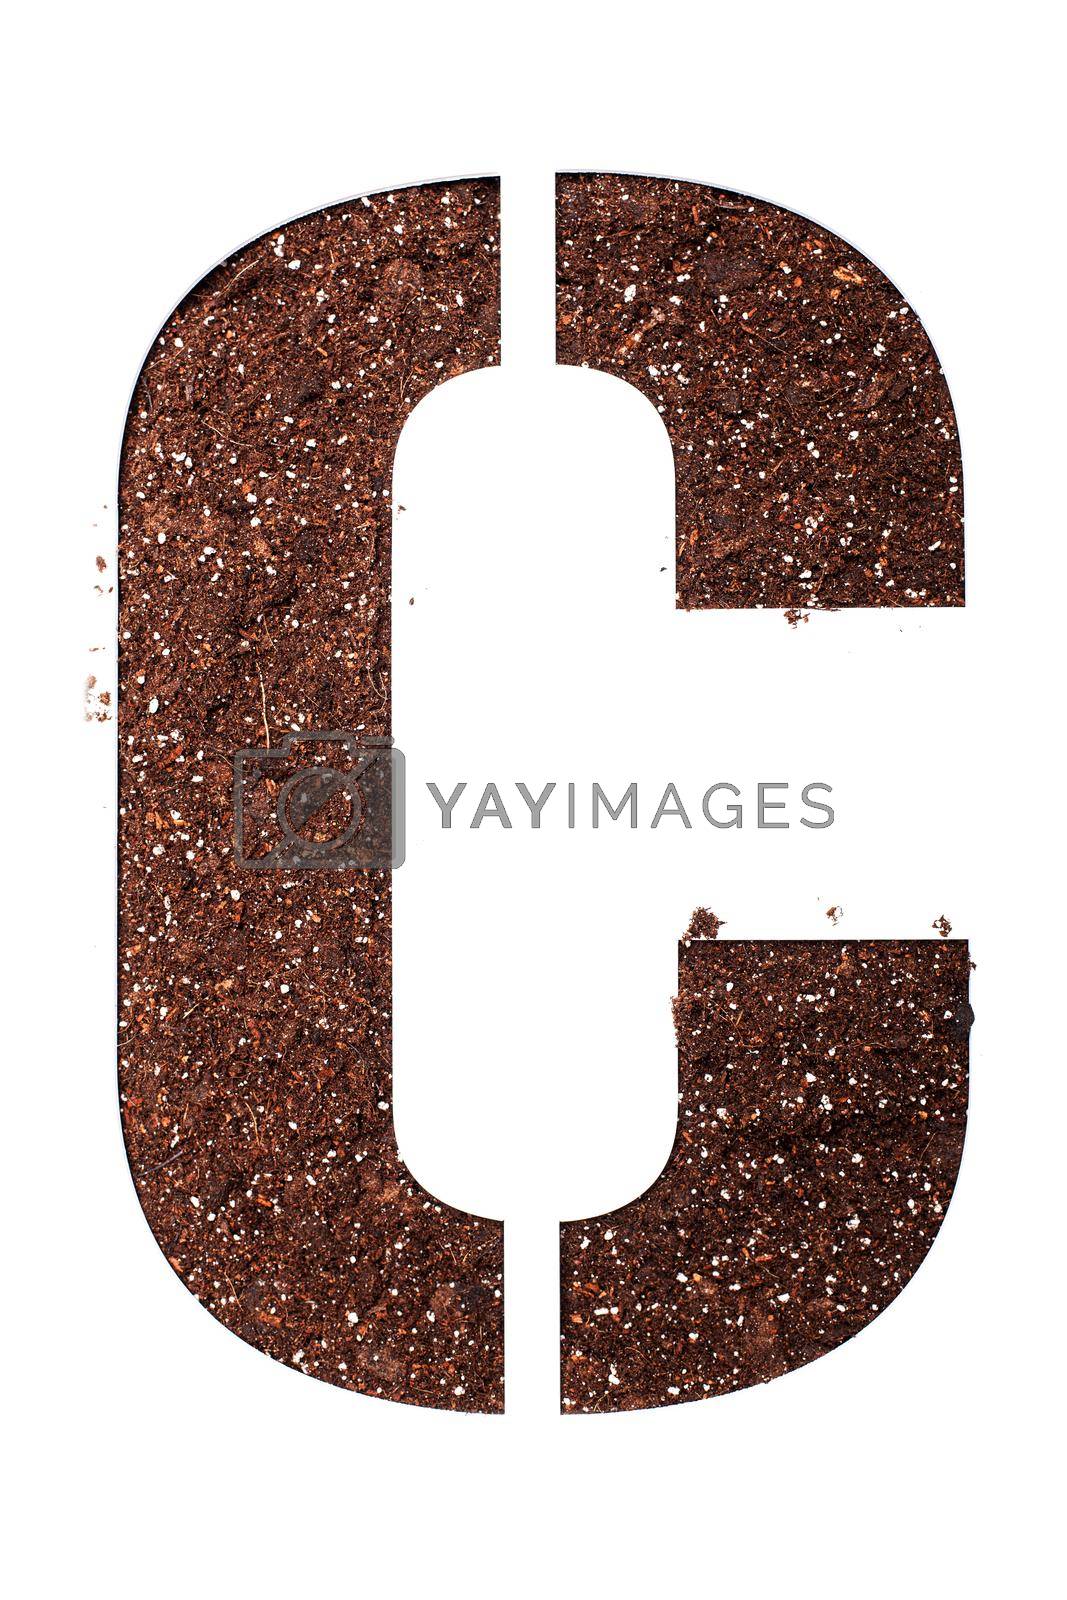 Royalty free image of stencil letter C made above dirt on white surface by kokimk